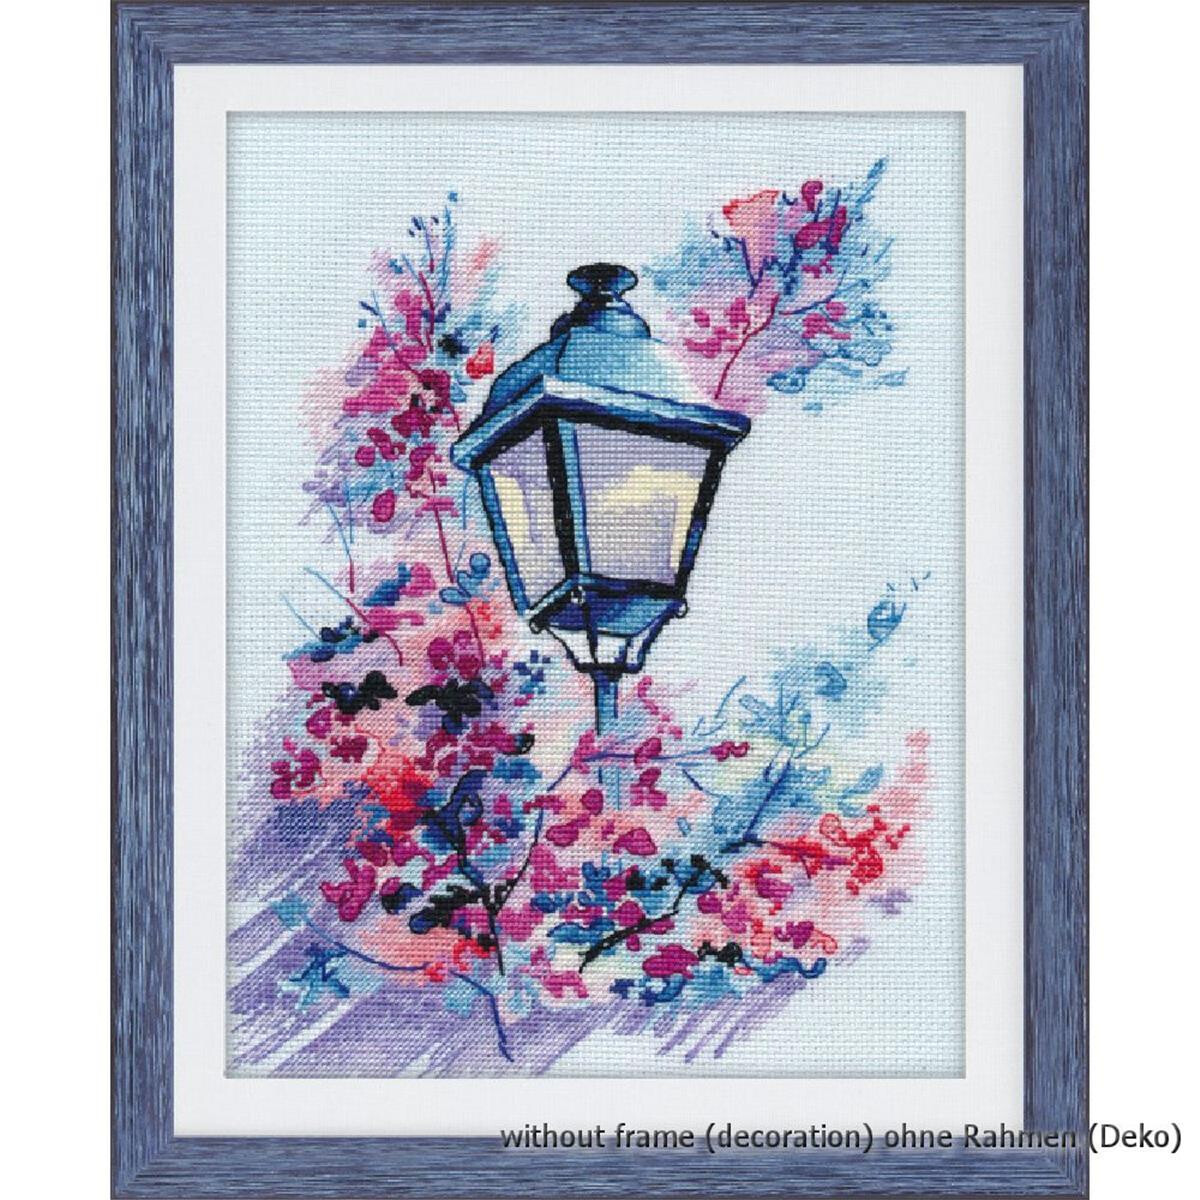 Oven counted cross stitch kit "Evening light",...